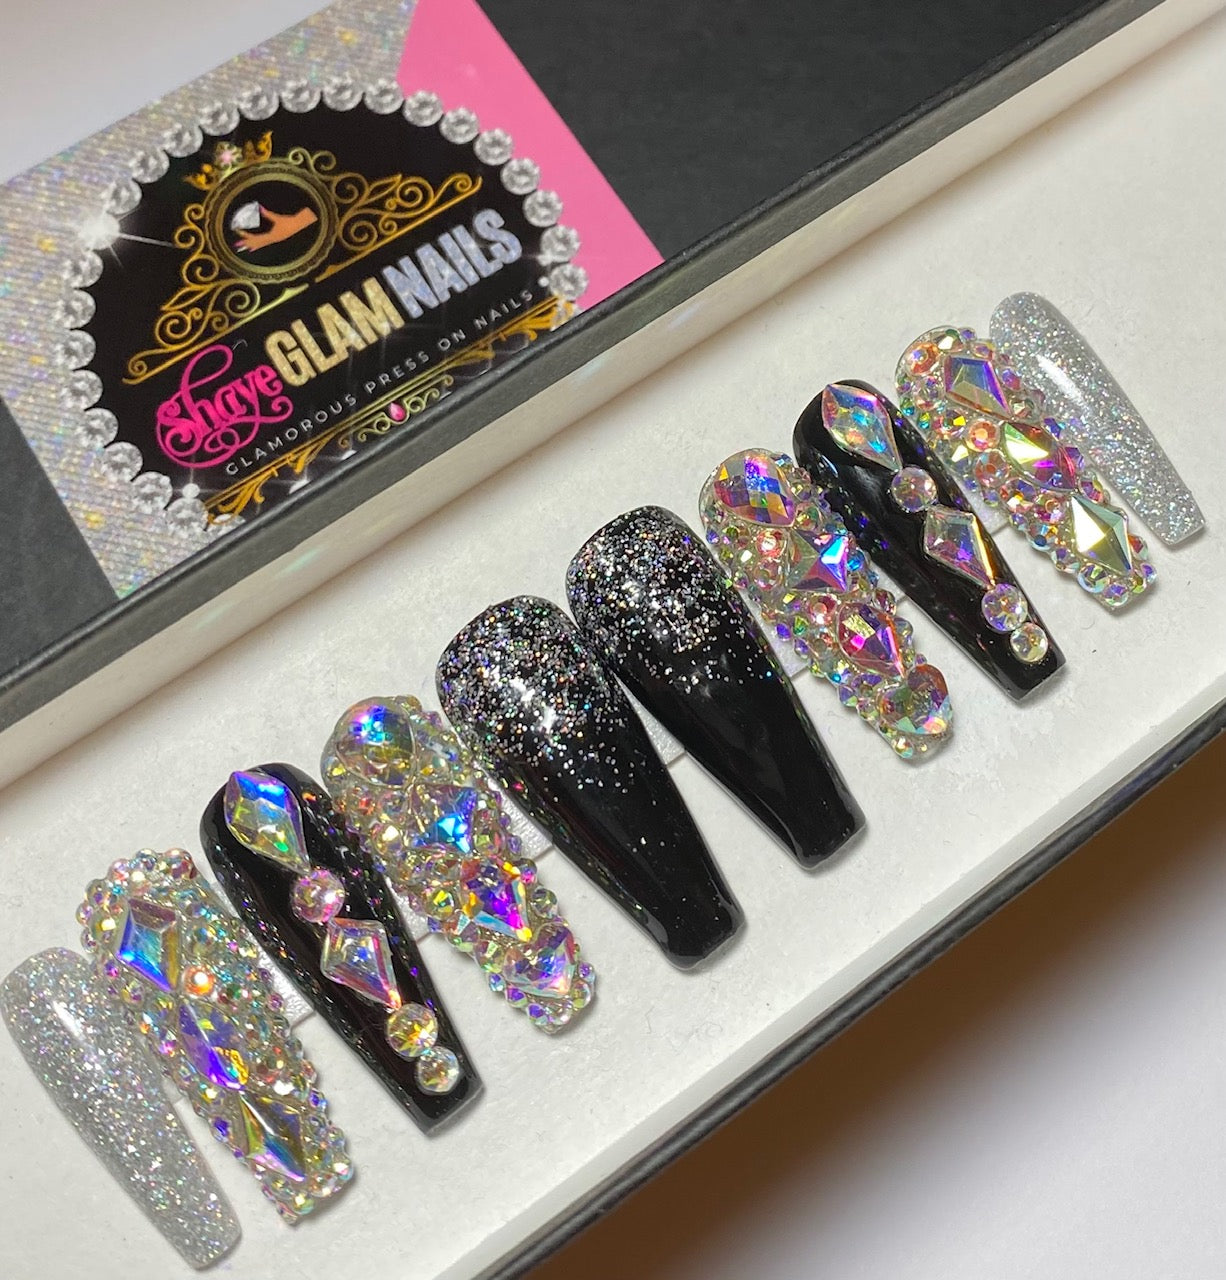 Black All Bling Everything Press On Nails – Shaye Glam Nails